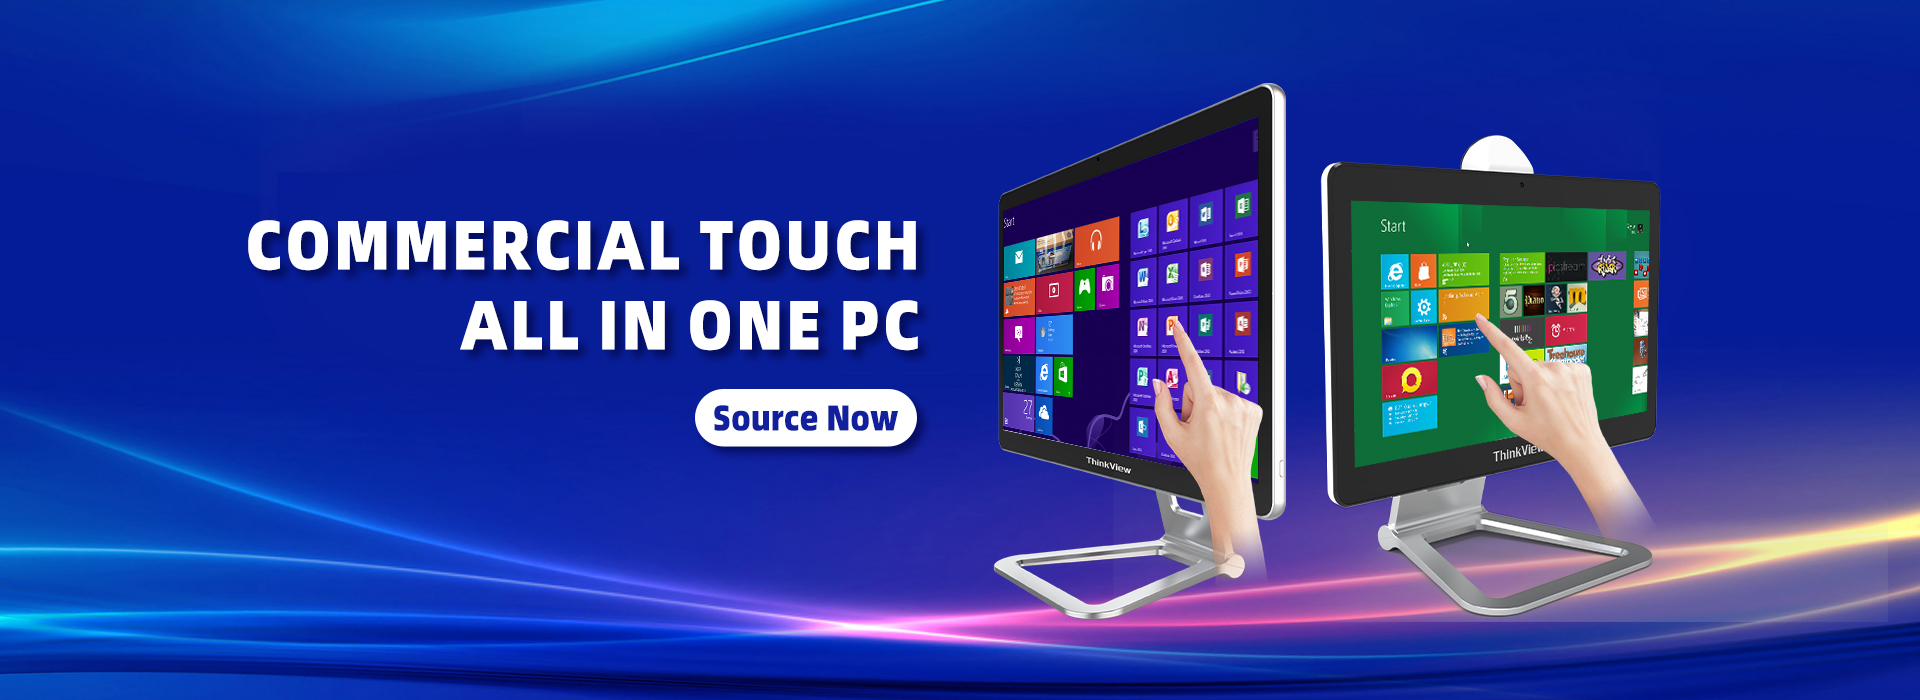 Commercial Touch Alles an engem PC